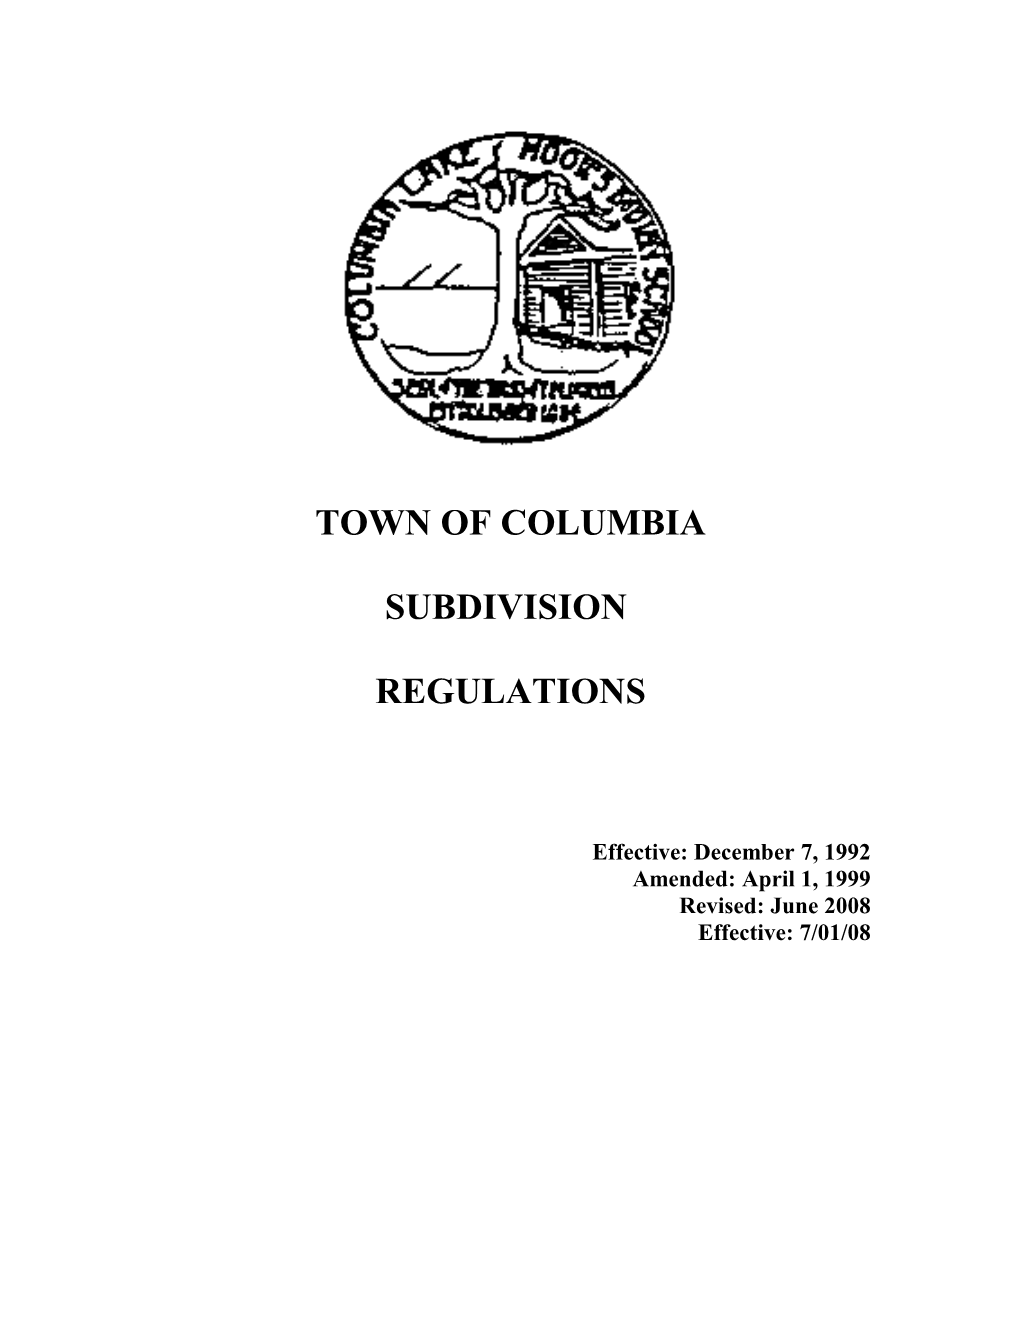 Town of Columbia Planning and Zoning Commision